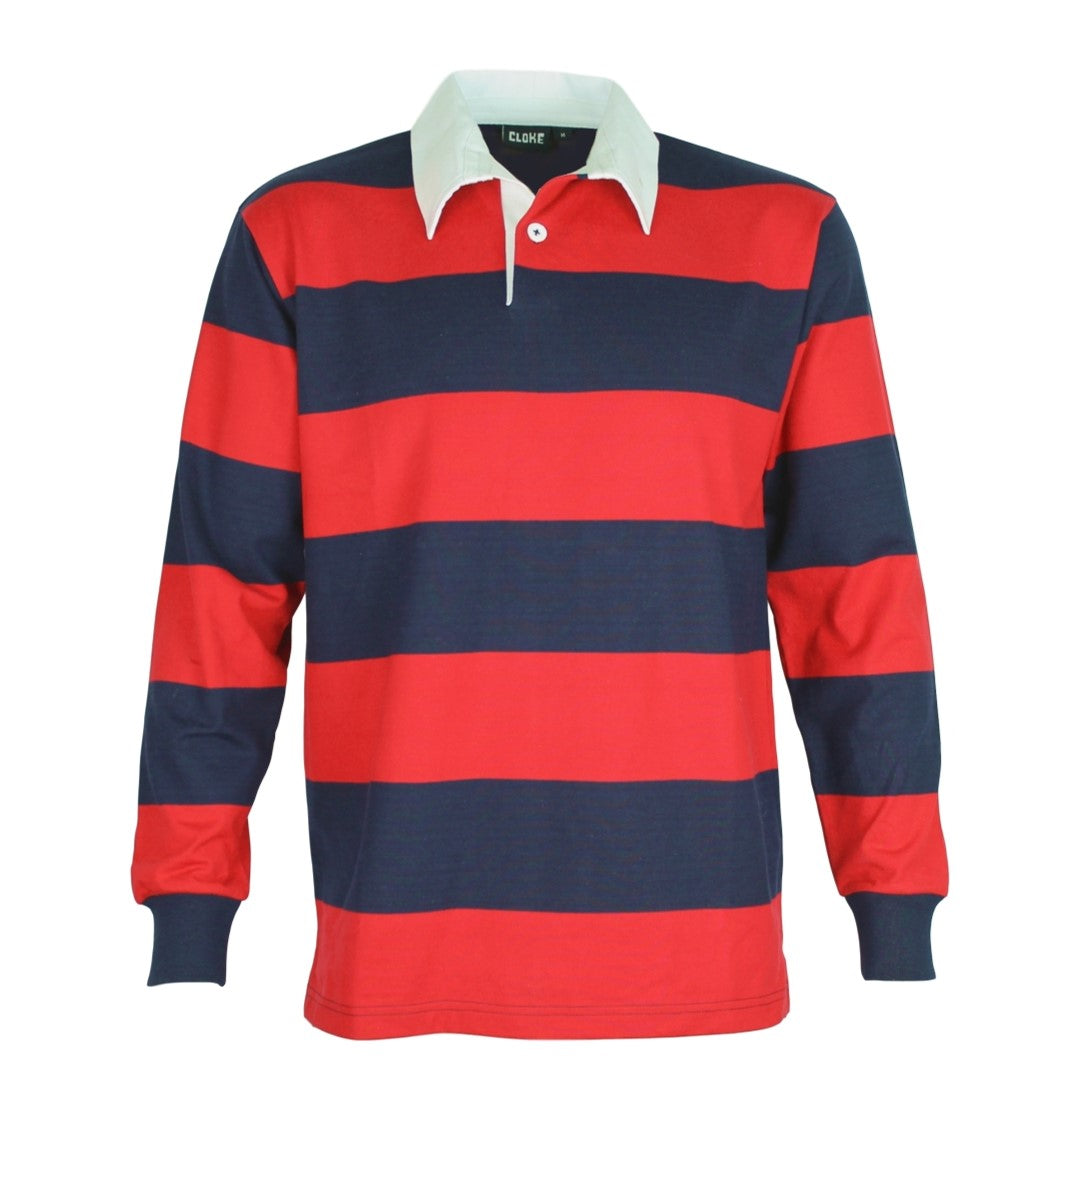 striped_long_sleeve_rugby_jersey_red.navy.jpg